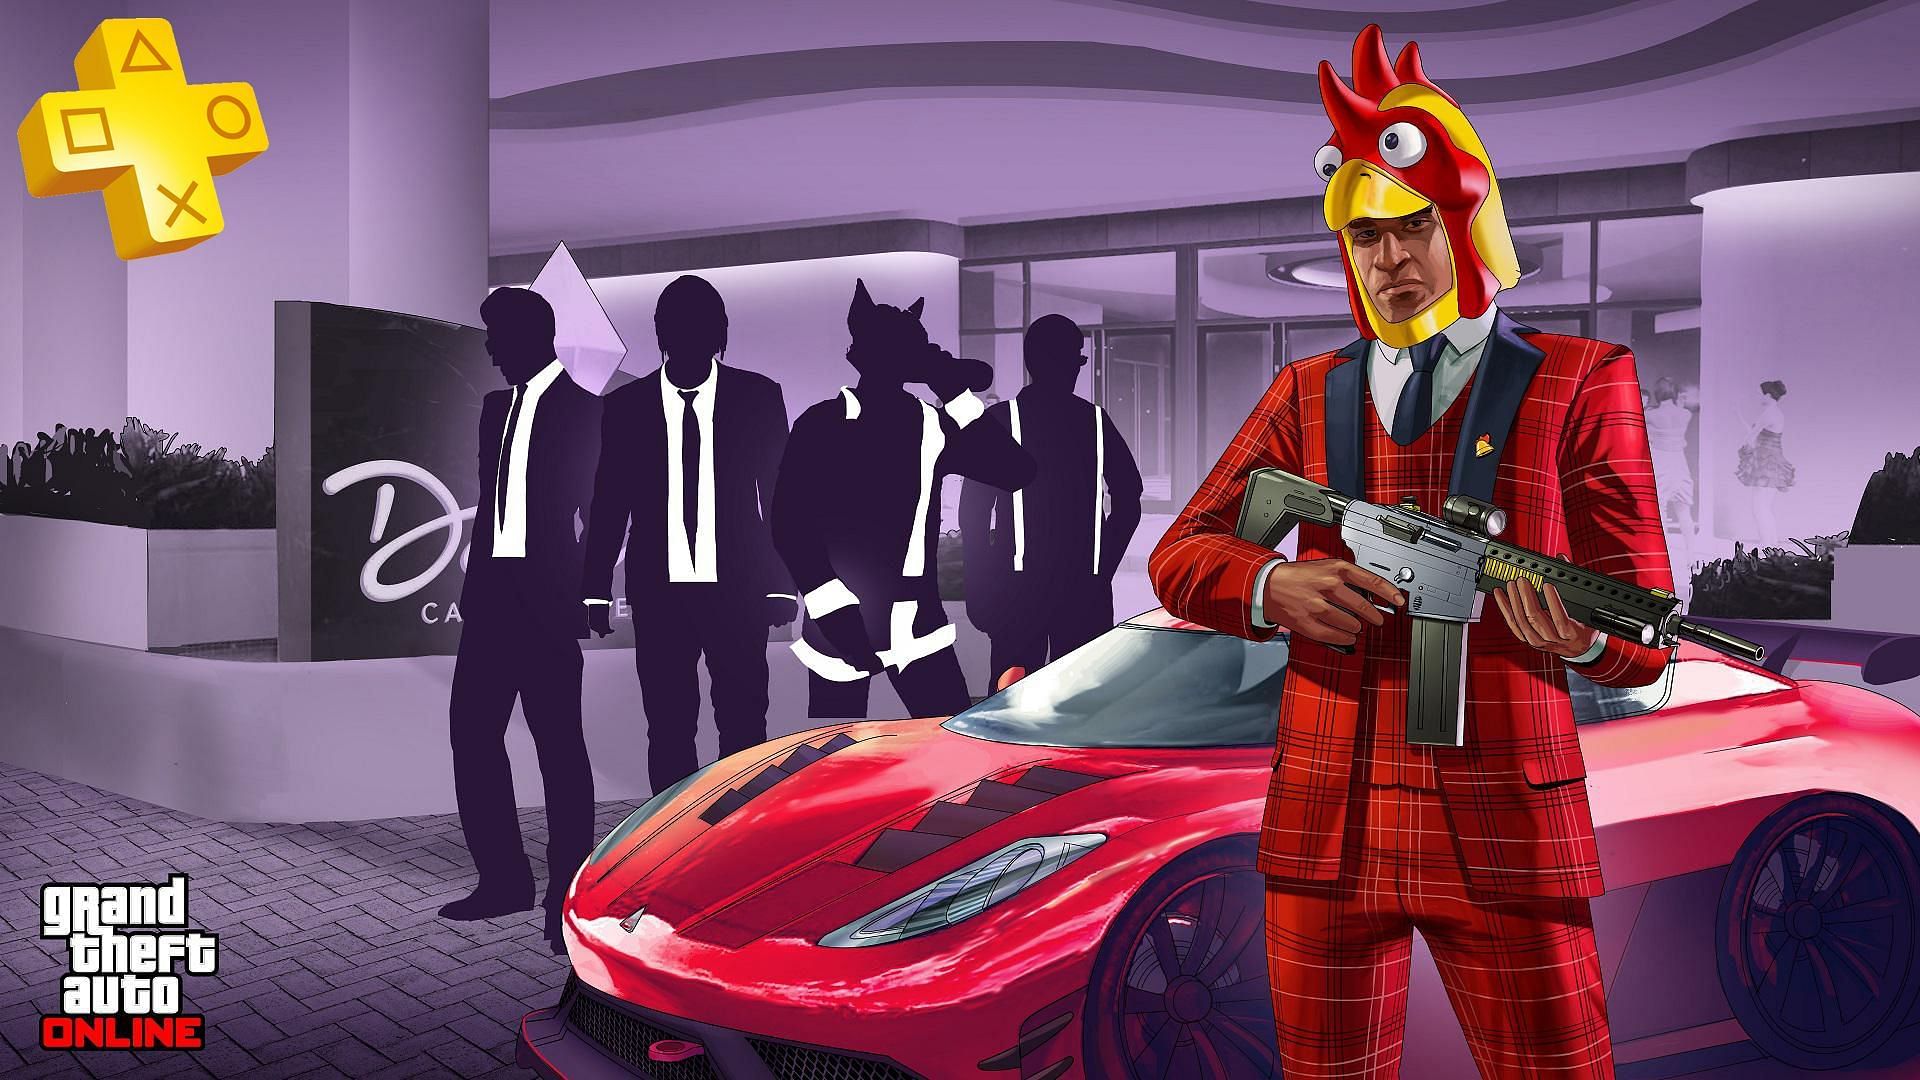 How to claim $1 million for free in GTA Online every month